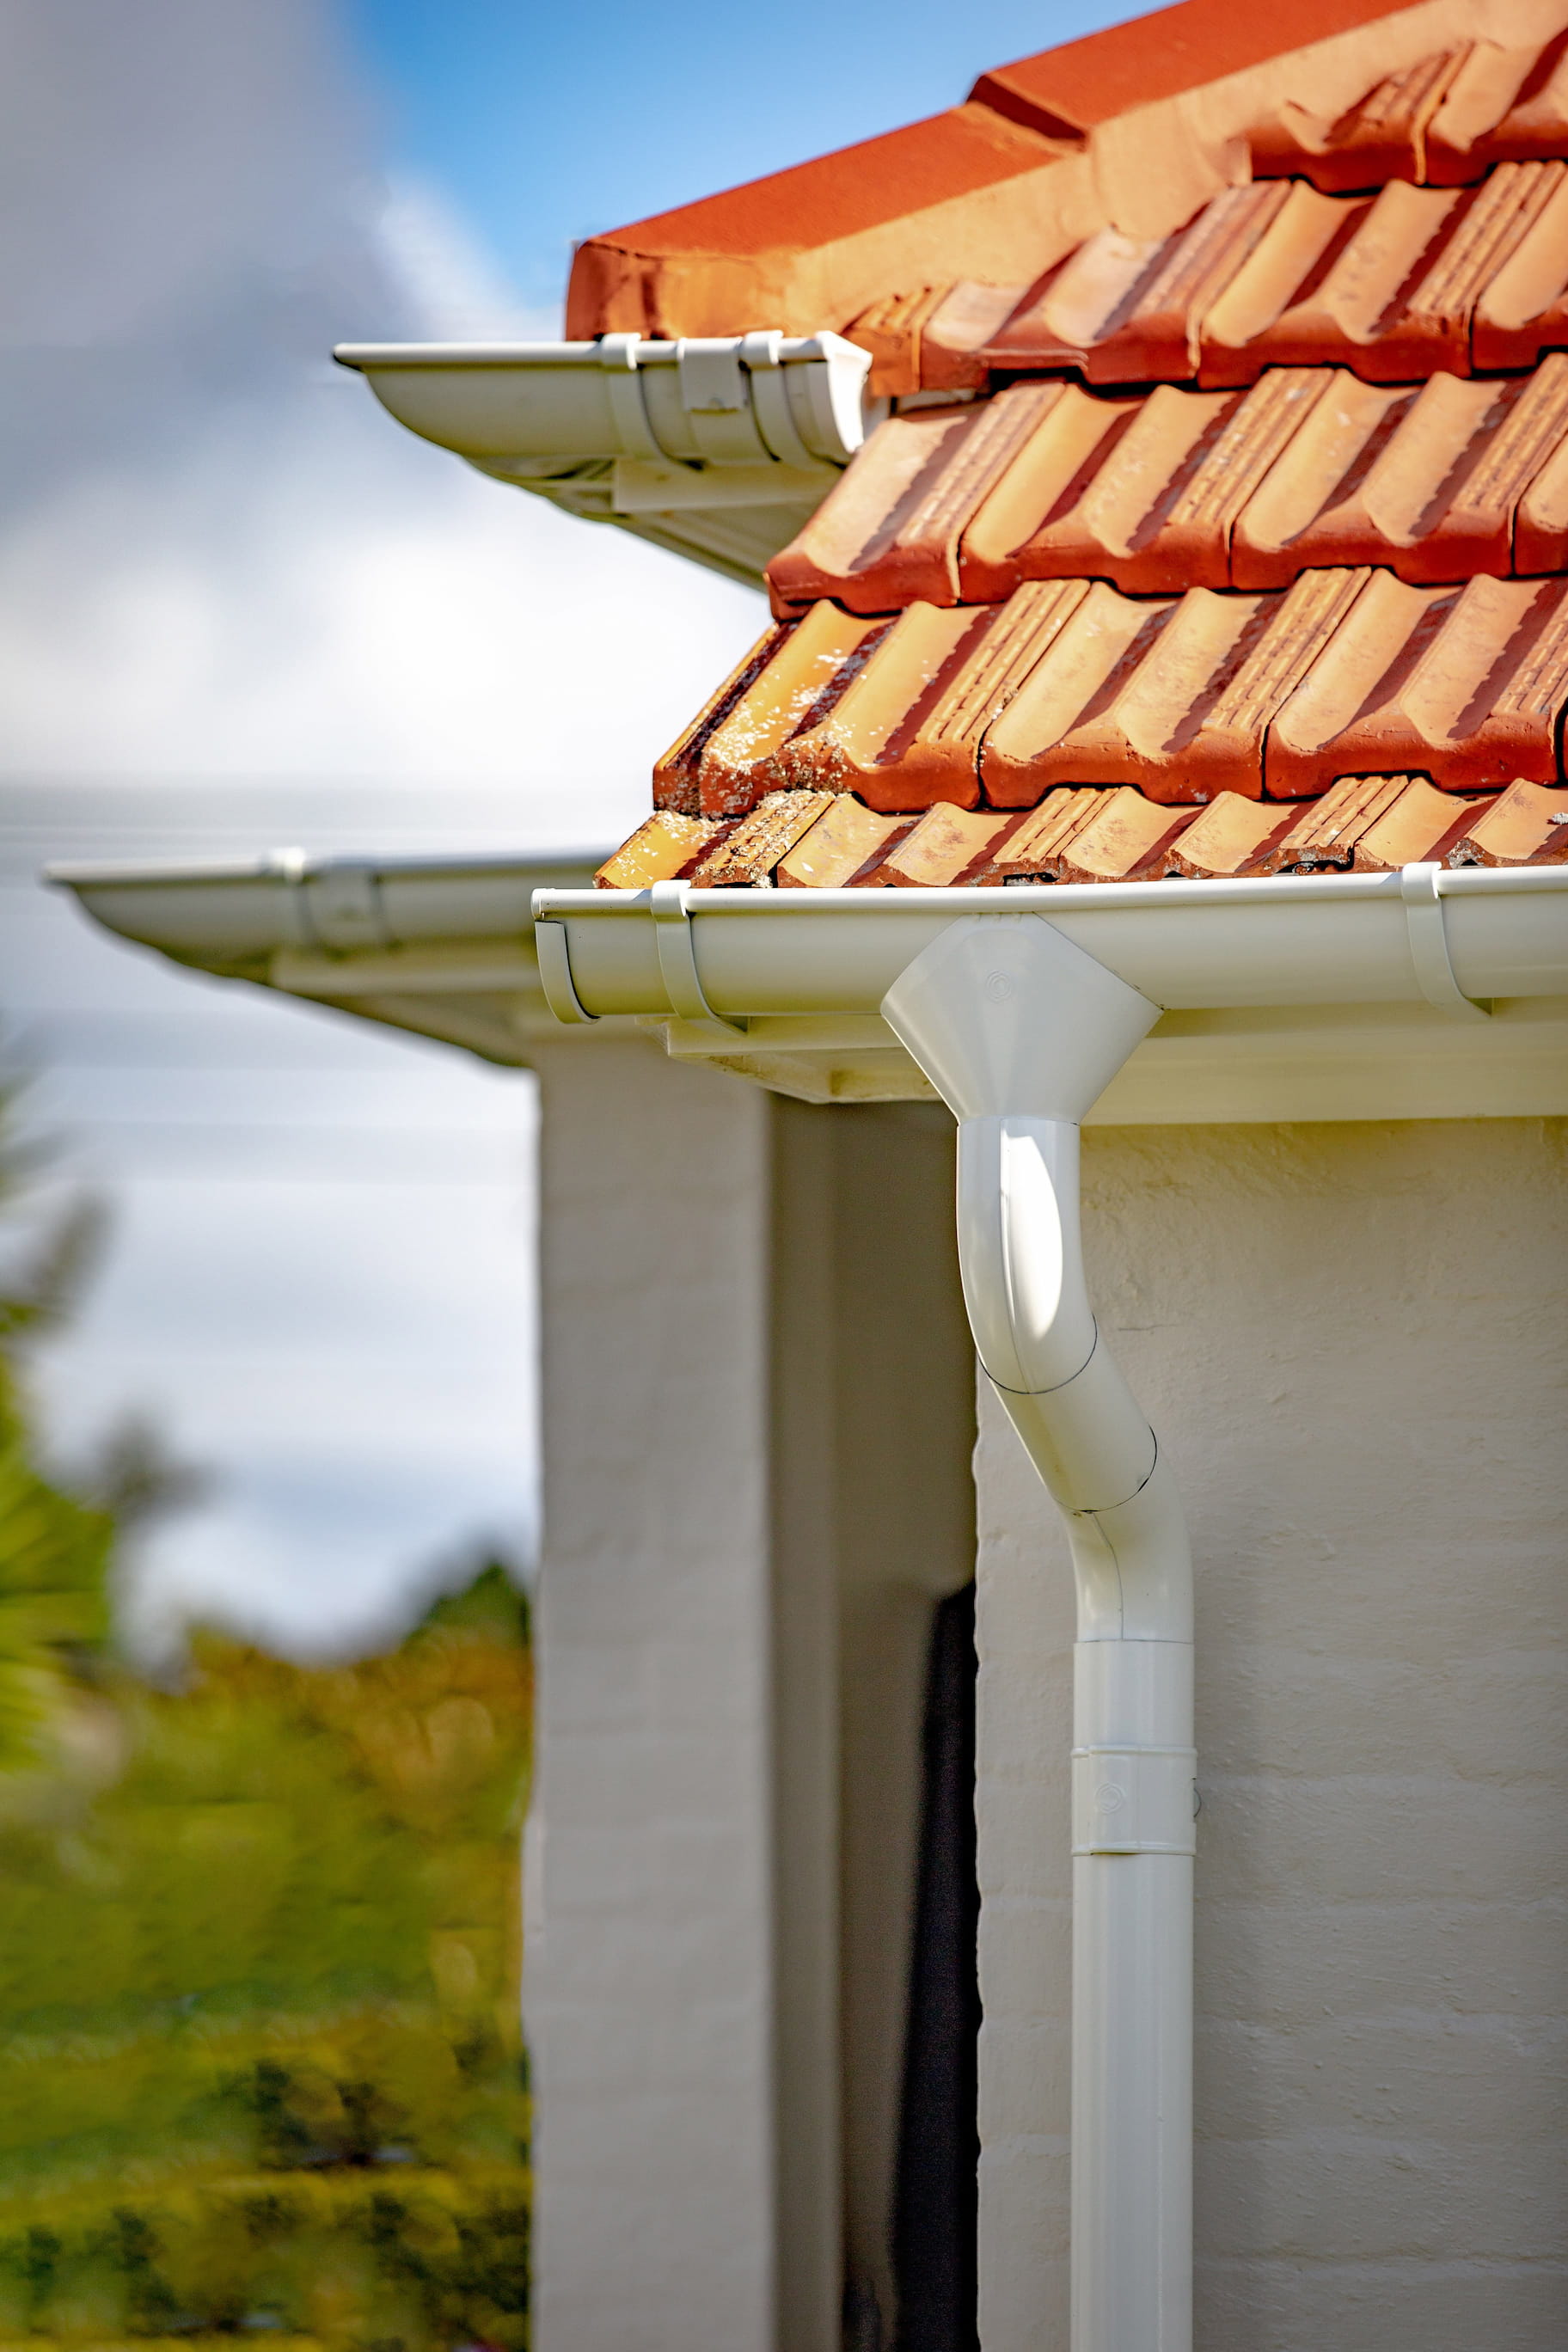 A detailed view of a roof with a Lindab gutter, designed to collect and redirect rainwater efficiently.